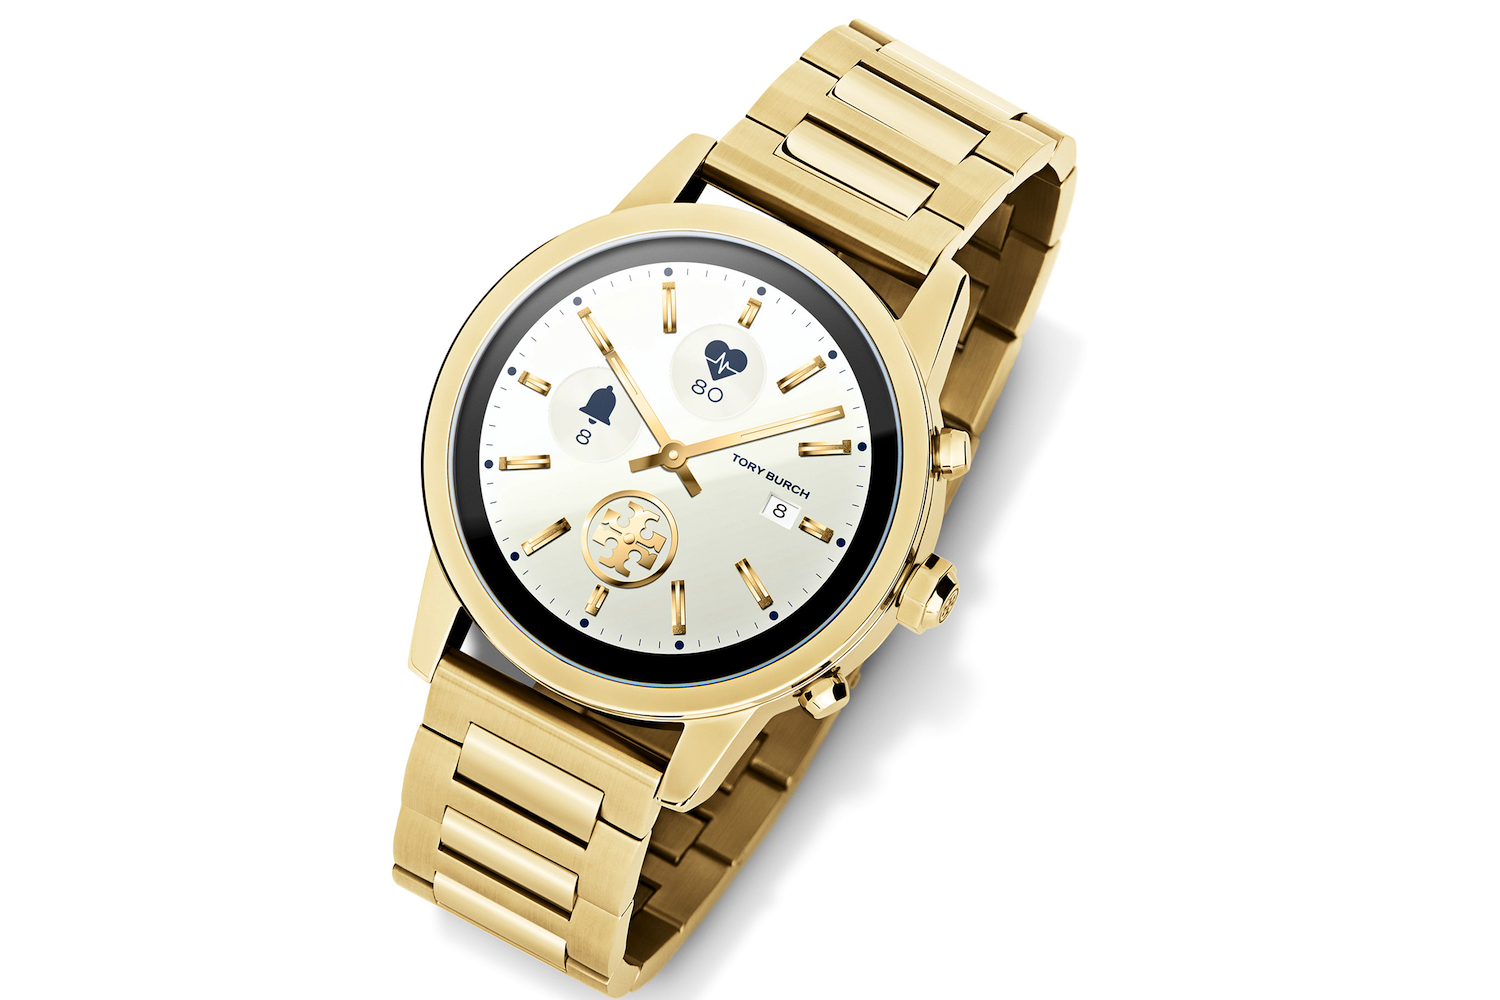 Tory Burch Branches Out Into Wear OS Smartwatches With the $395 Gigi |  Digital Trends